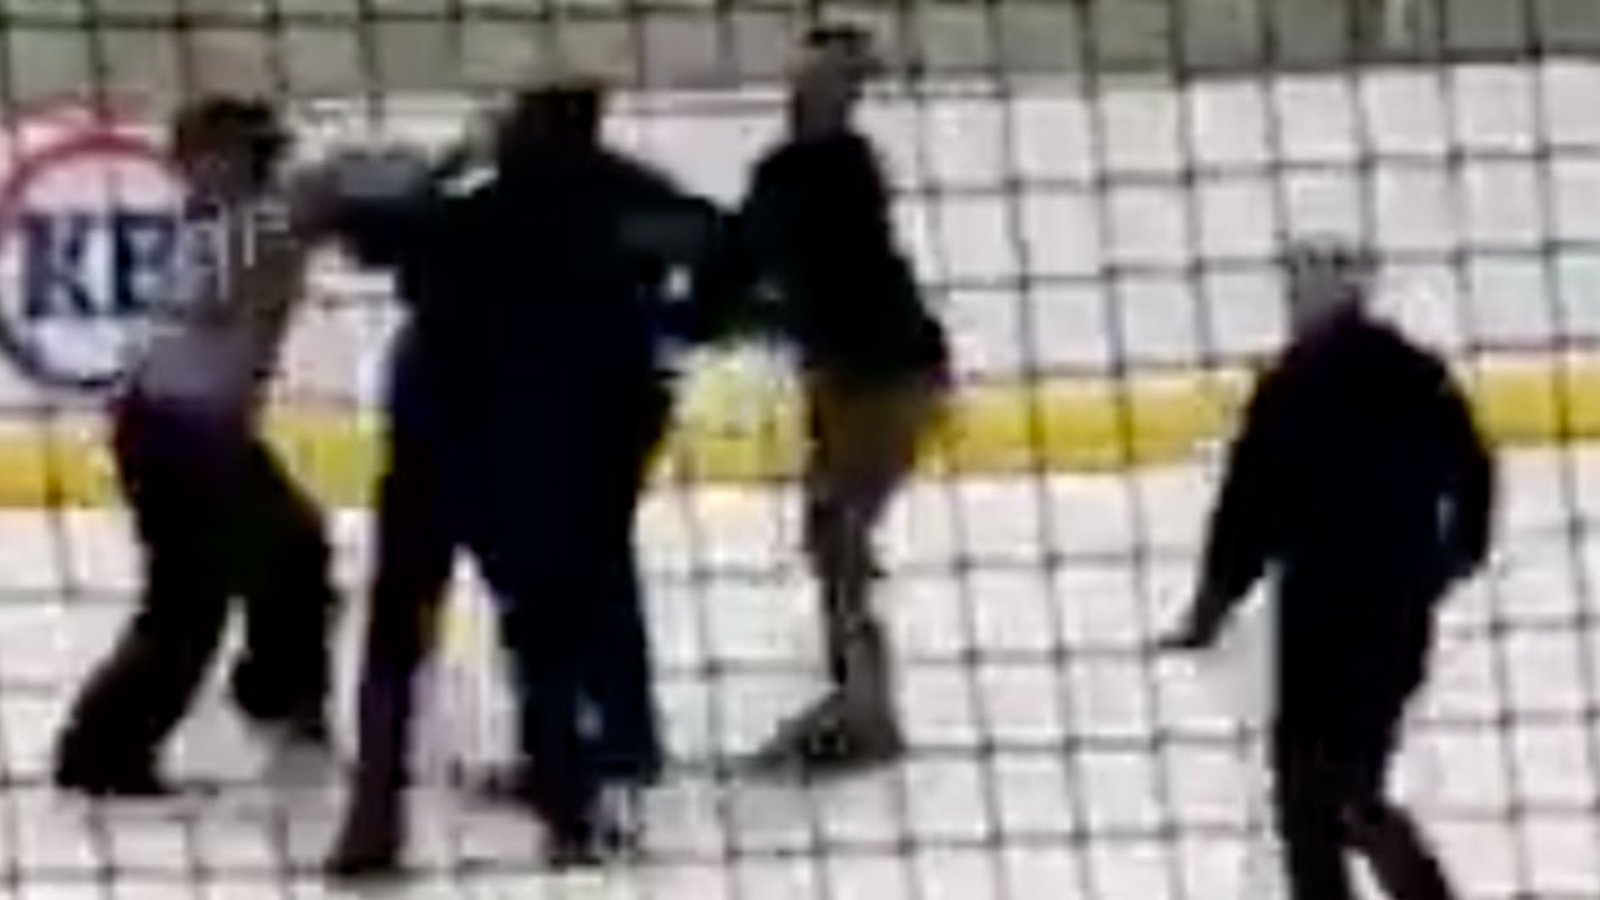 Referee assaulted on-ice by crazy hockey Dad in Alberta